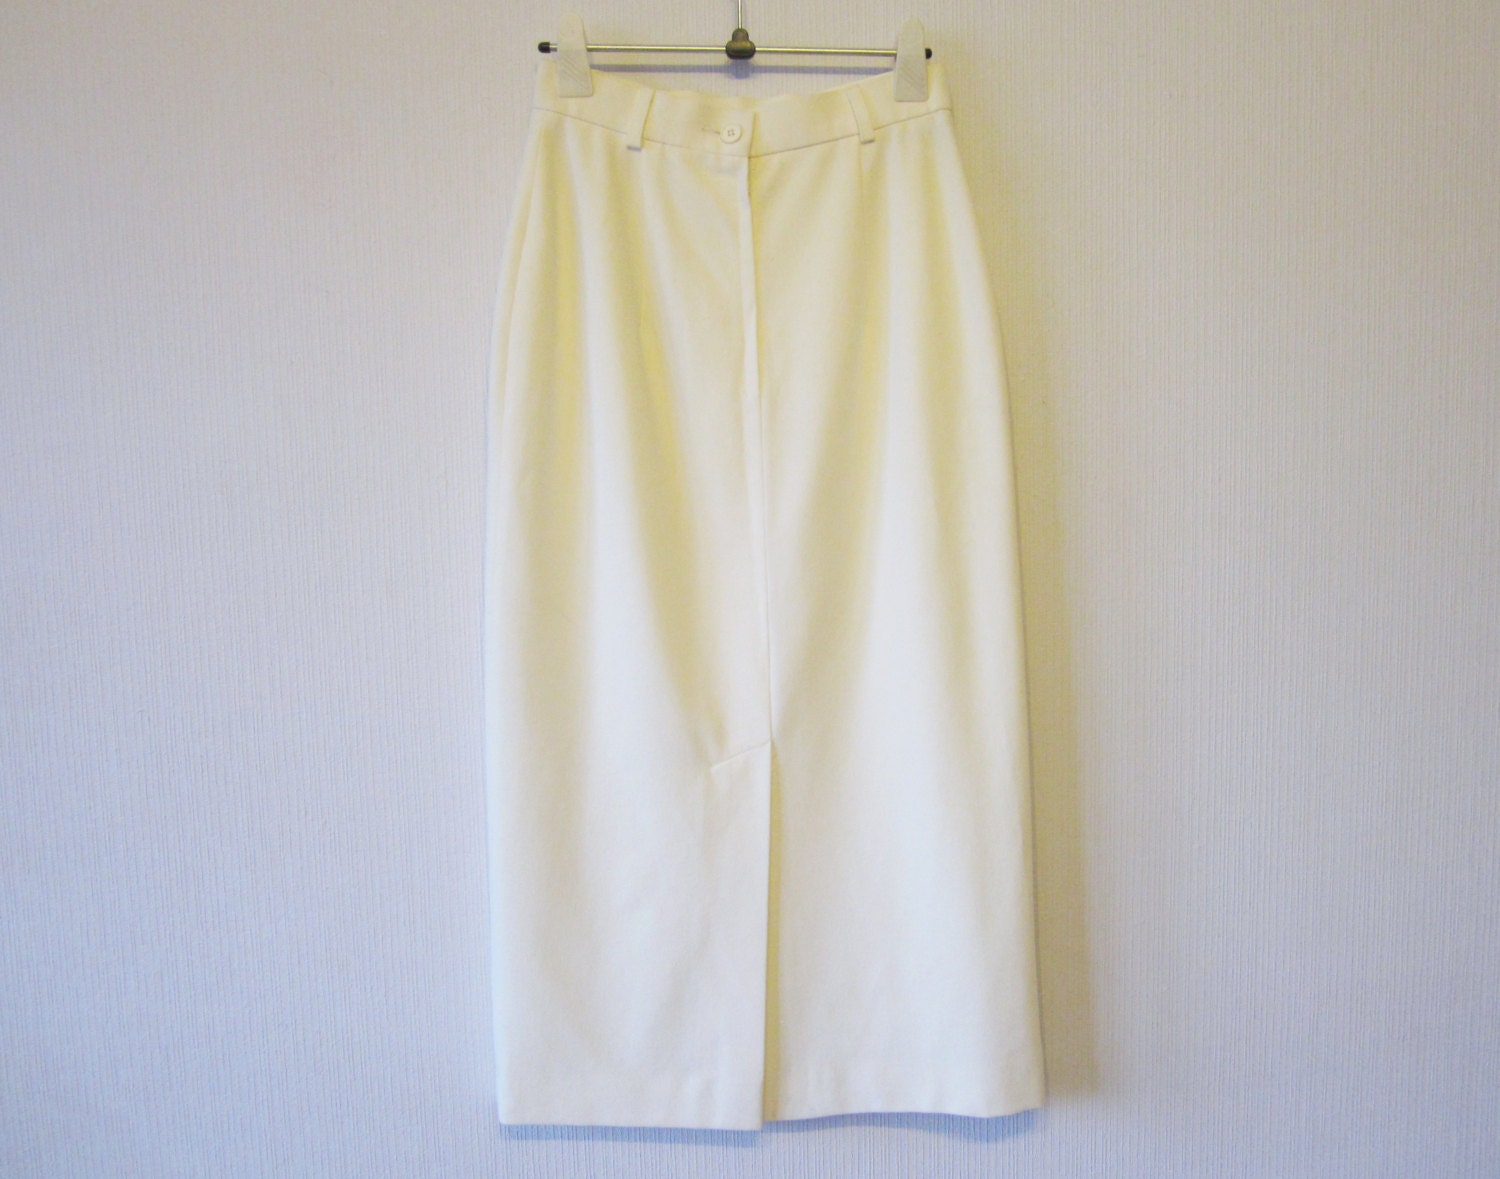 Ivory off White Pencil Skirt Midi High Waisted by VintageDreamBox